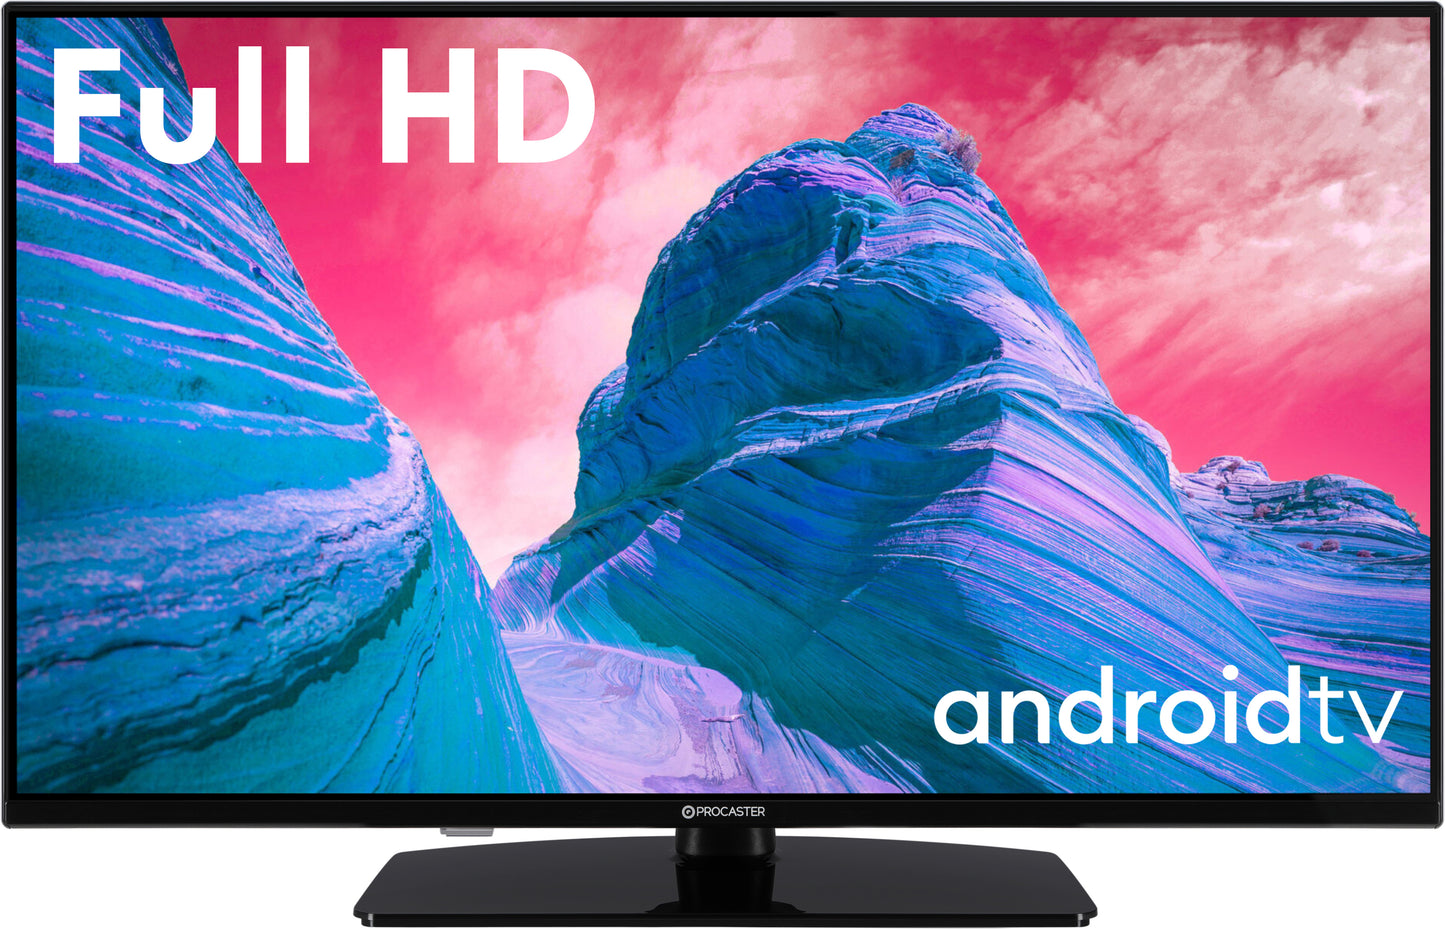 ProCaster LE-40SL702H 40" Full HD Android LED TV